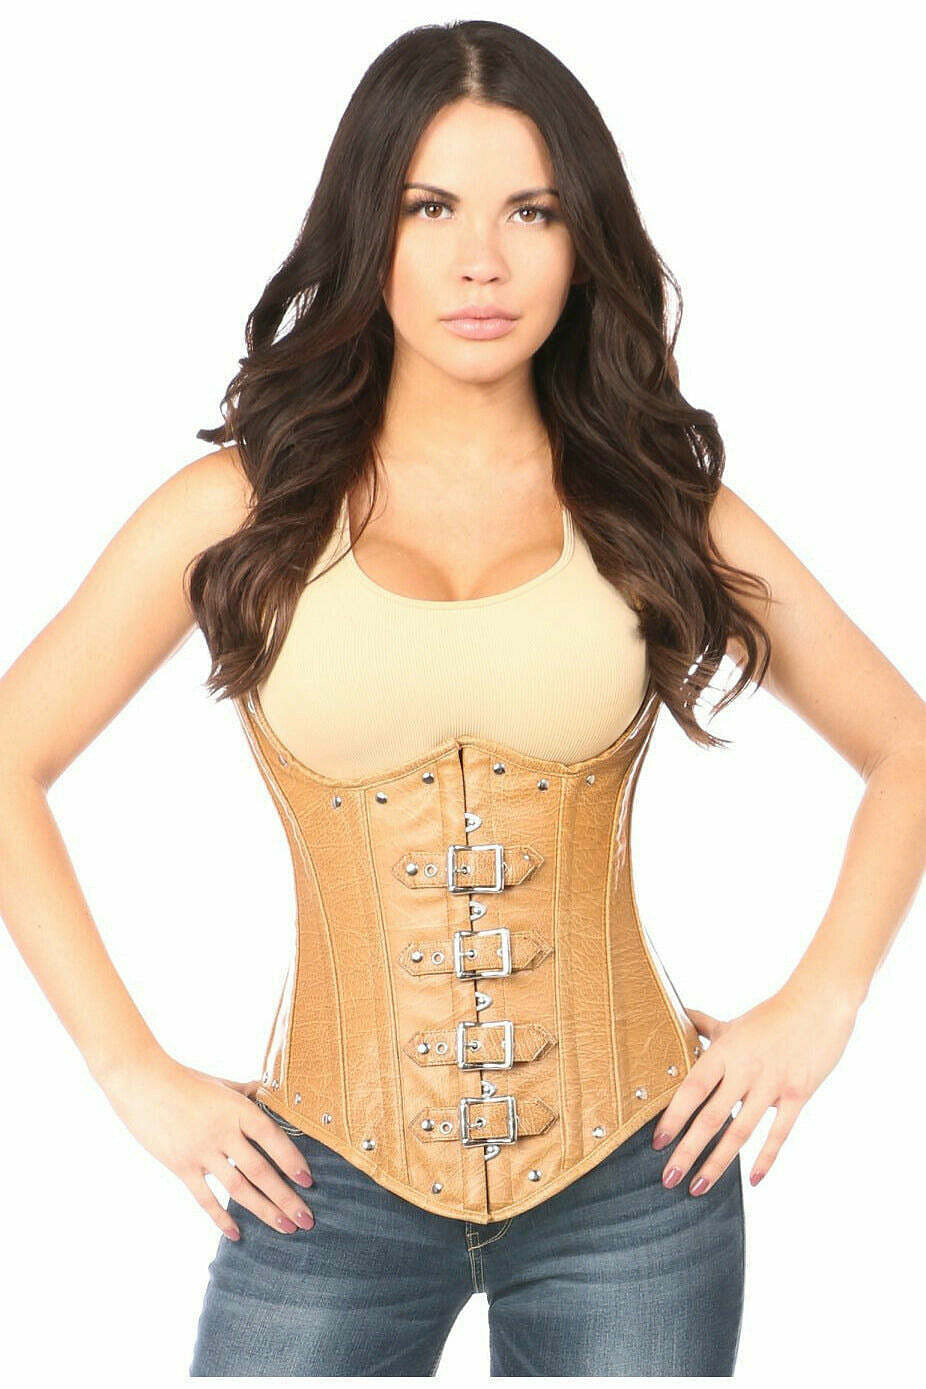 Top Drawer Steel Boned Distressed Faux Leather Underbust Corset Top